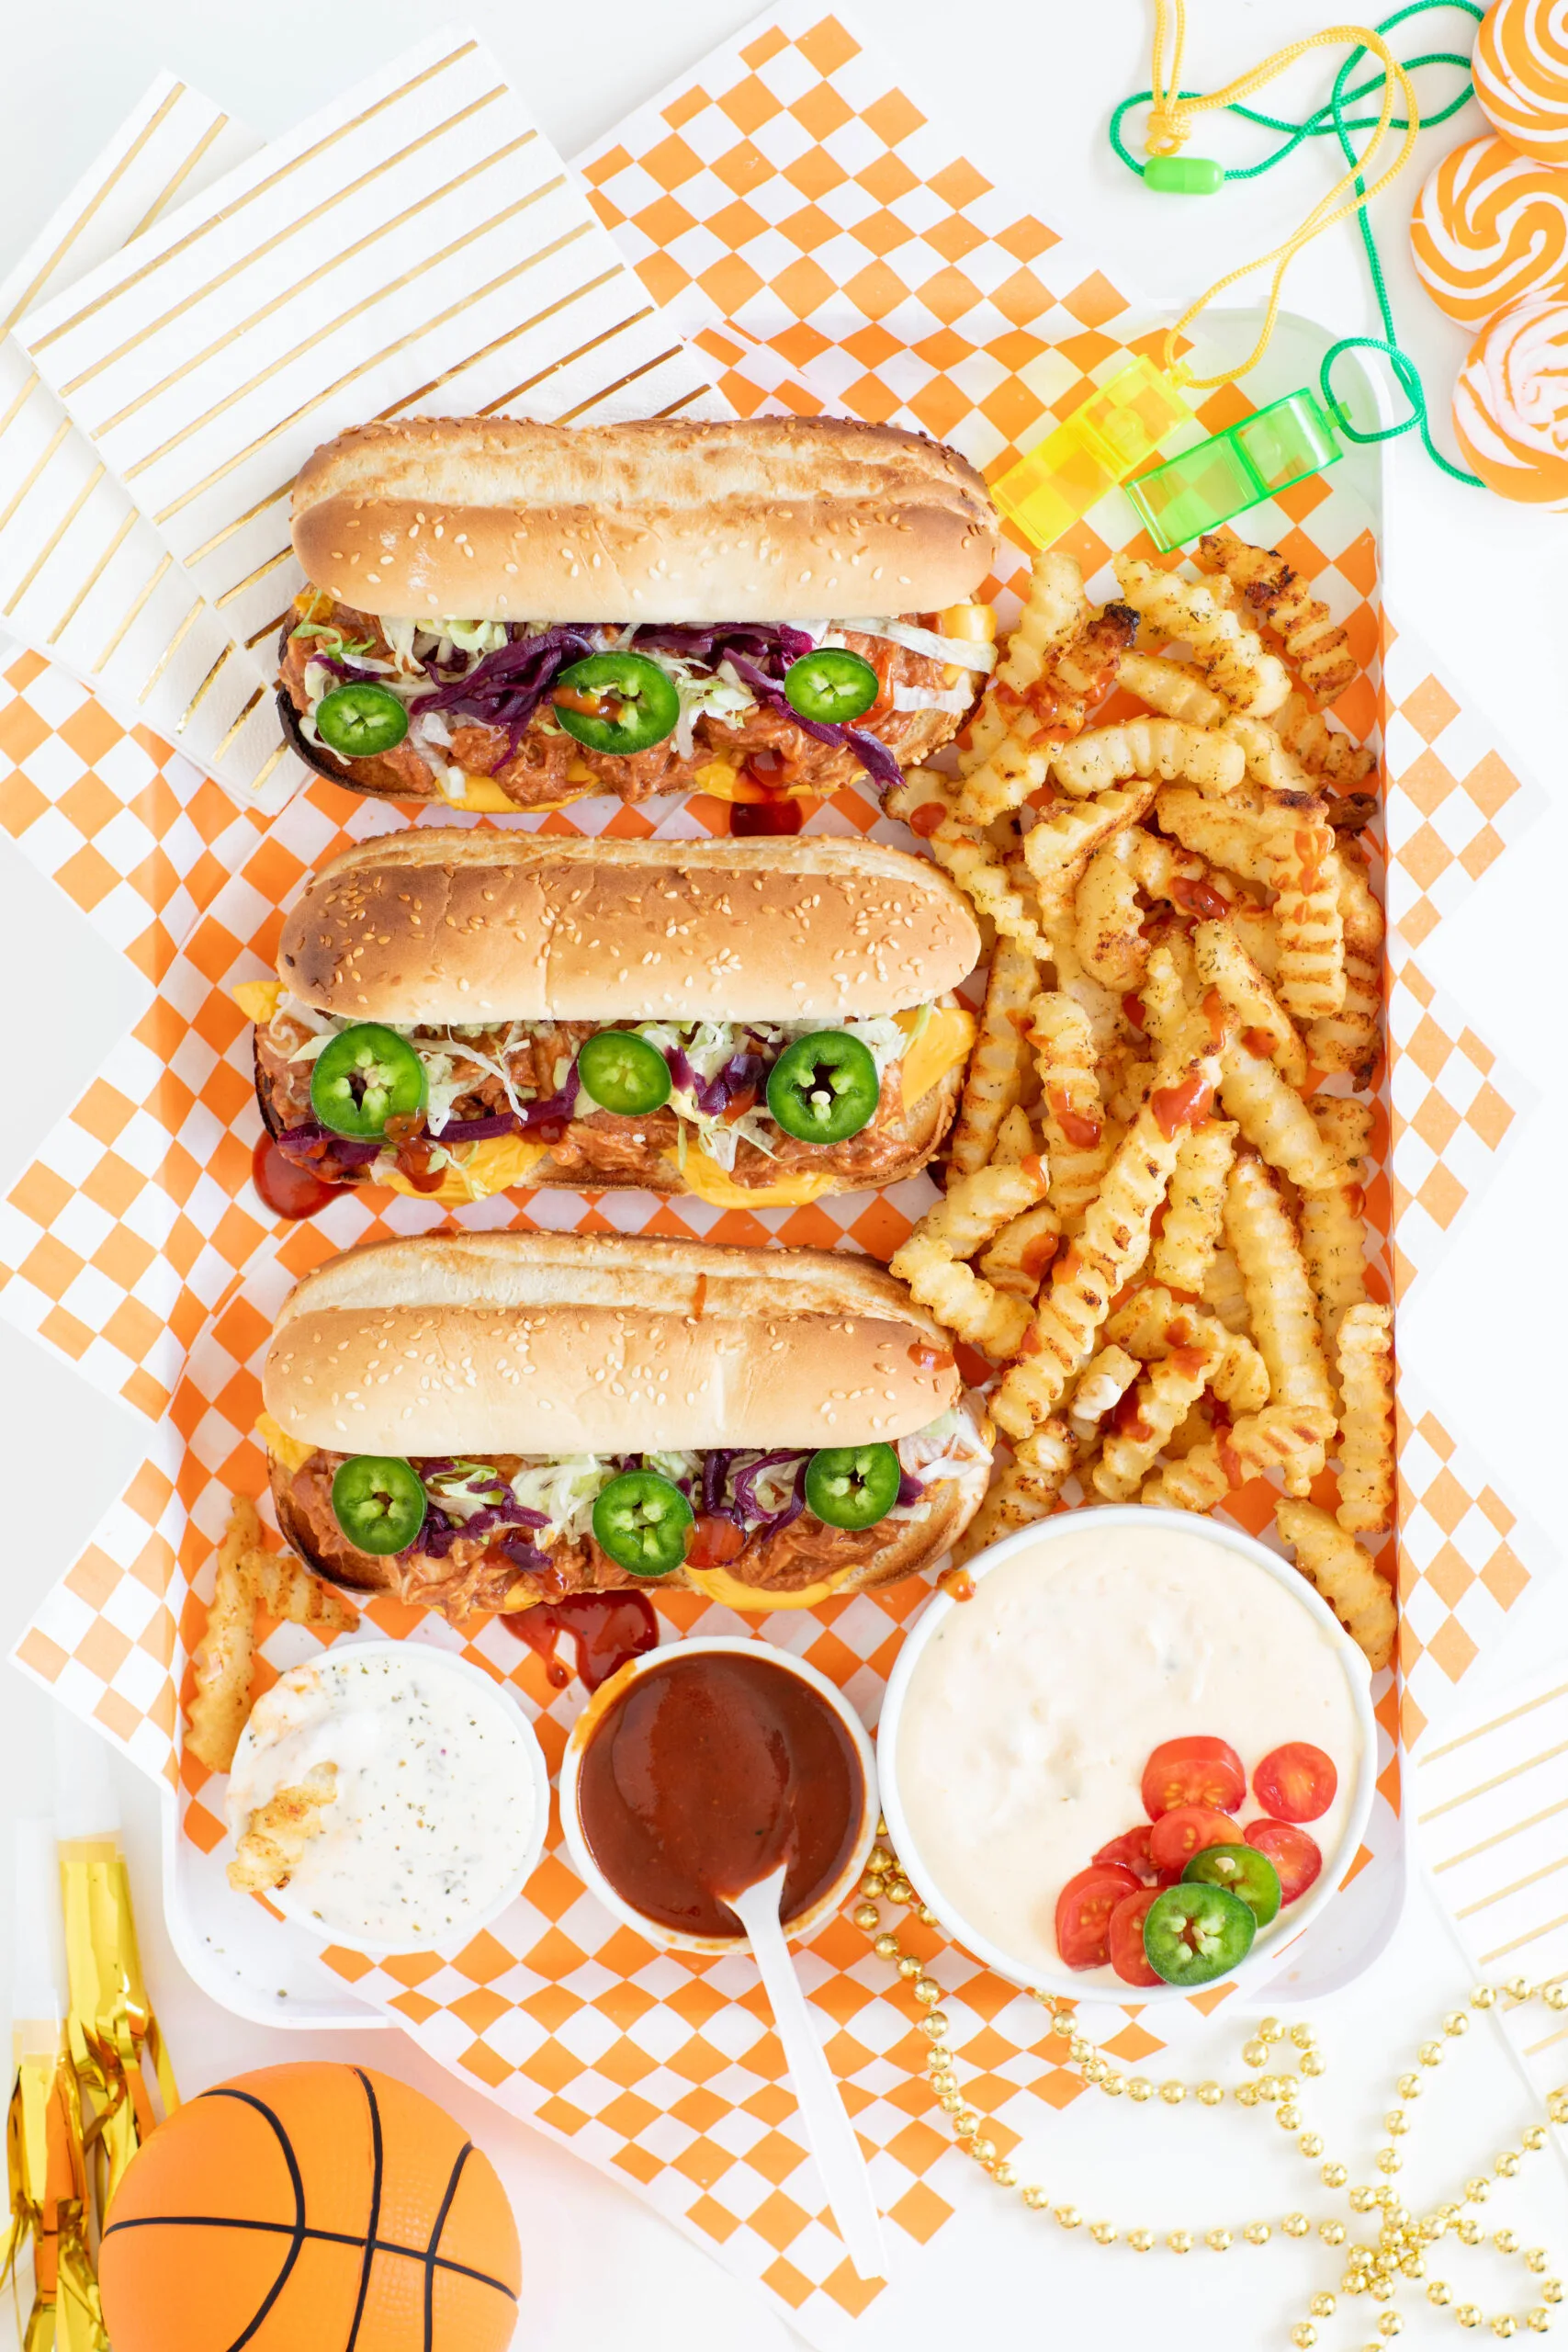 pulled chicken sandwiches layered on a serving tray with crinkle french fries and various condiments and dips in small bowls and dishes. platter is decorated with novelty toy whistles, gold party blowers and mini toy basketball